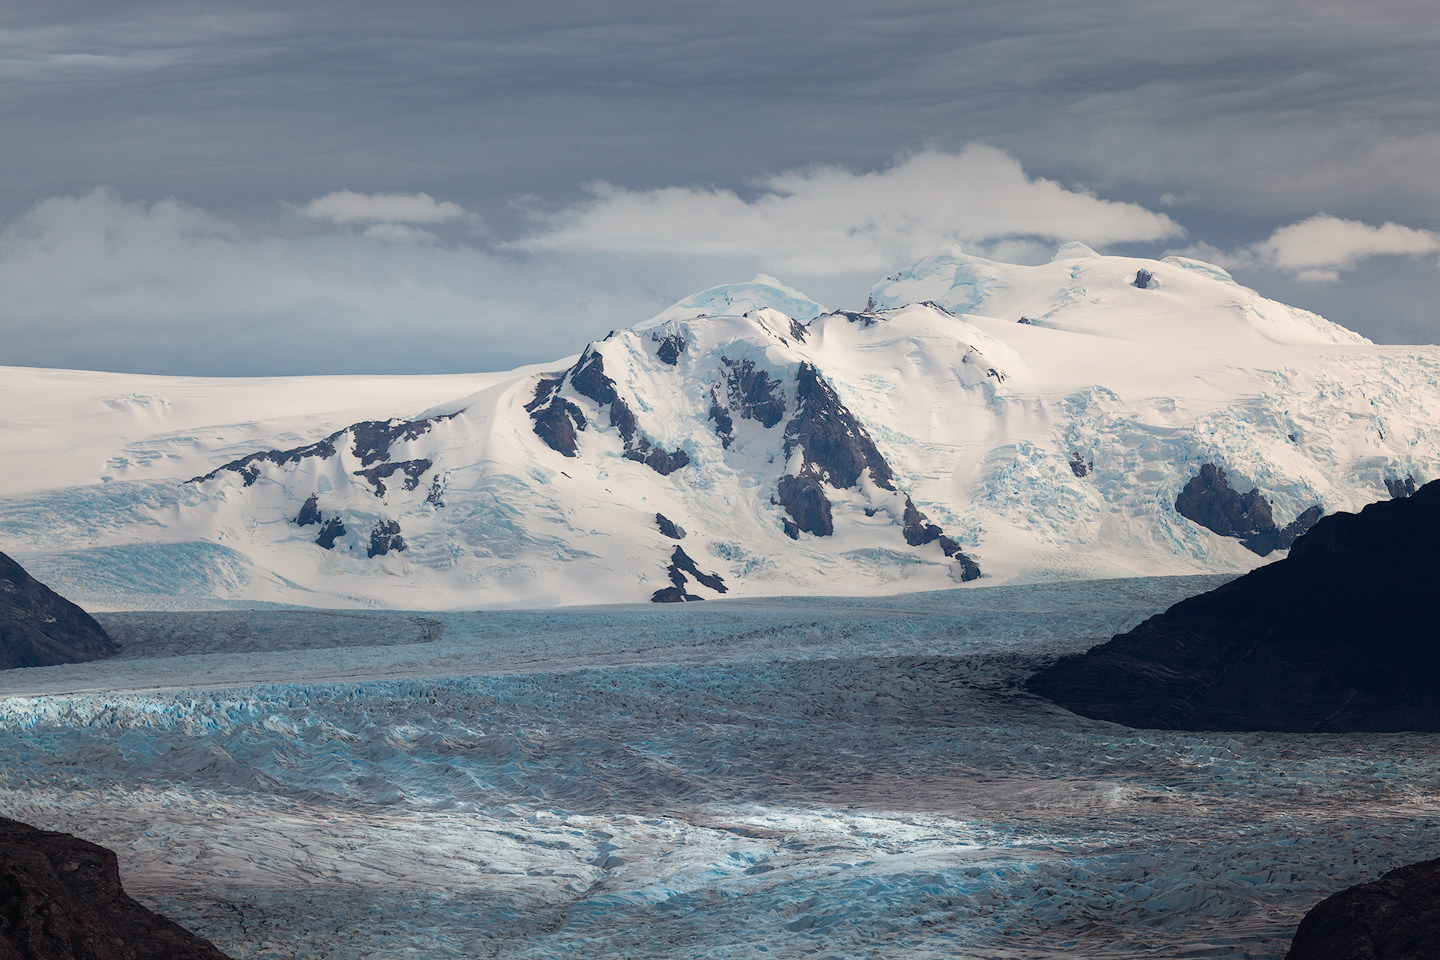 Glaciar Grey and Southern Patagonian Icefield seen from the W-Trek